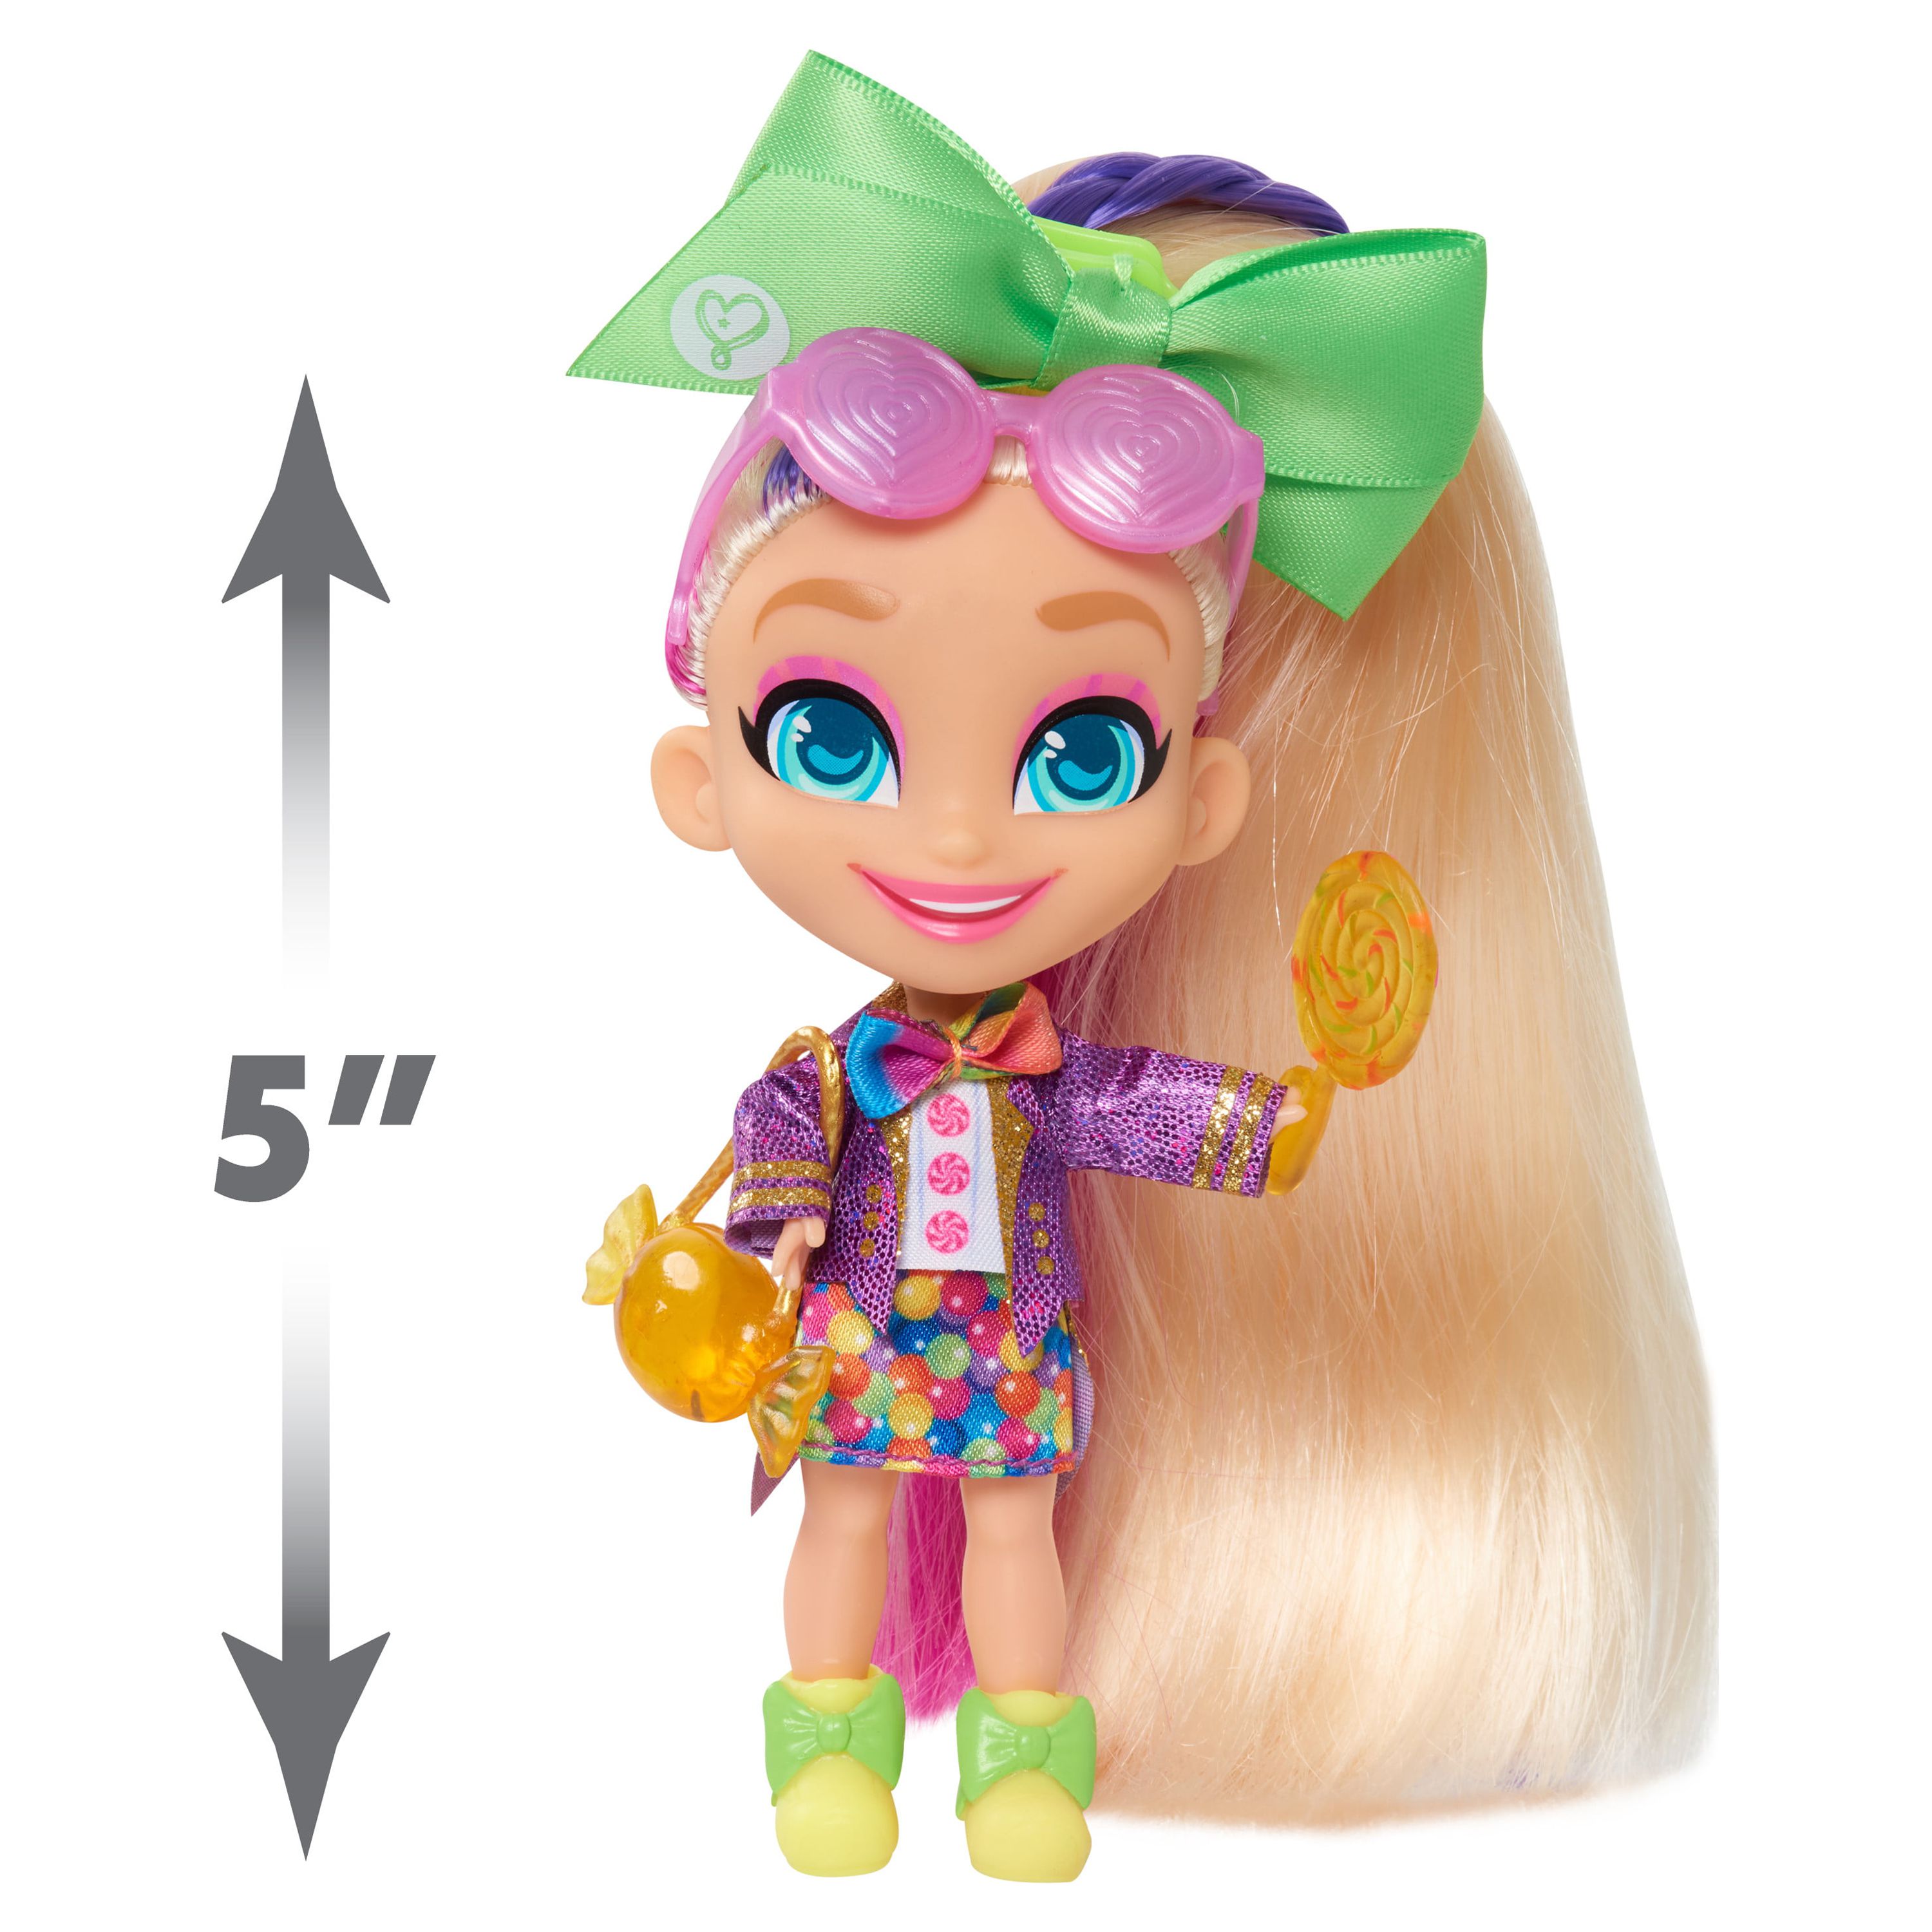 JoJo Siwa Hairdorables Loves JoJo Limited Edition Collectible Doll, Series 4, Candy Time, Includes 10 Surprises,  Kids Toys for Ages 3 Up, Gifts and Presents - image 3 of 6